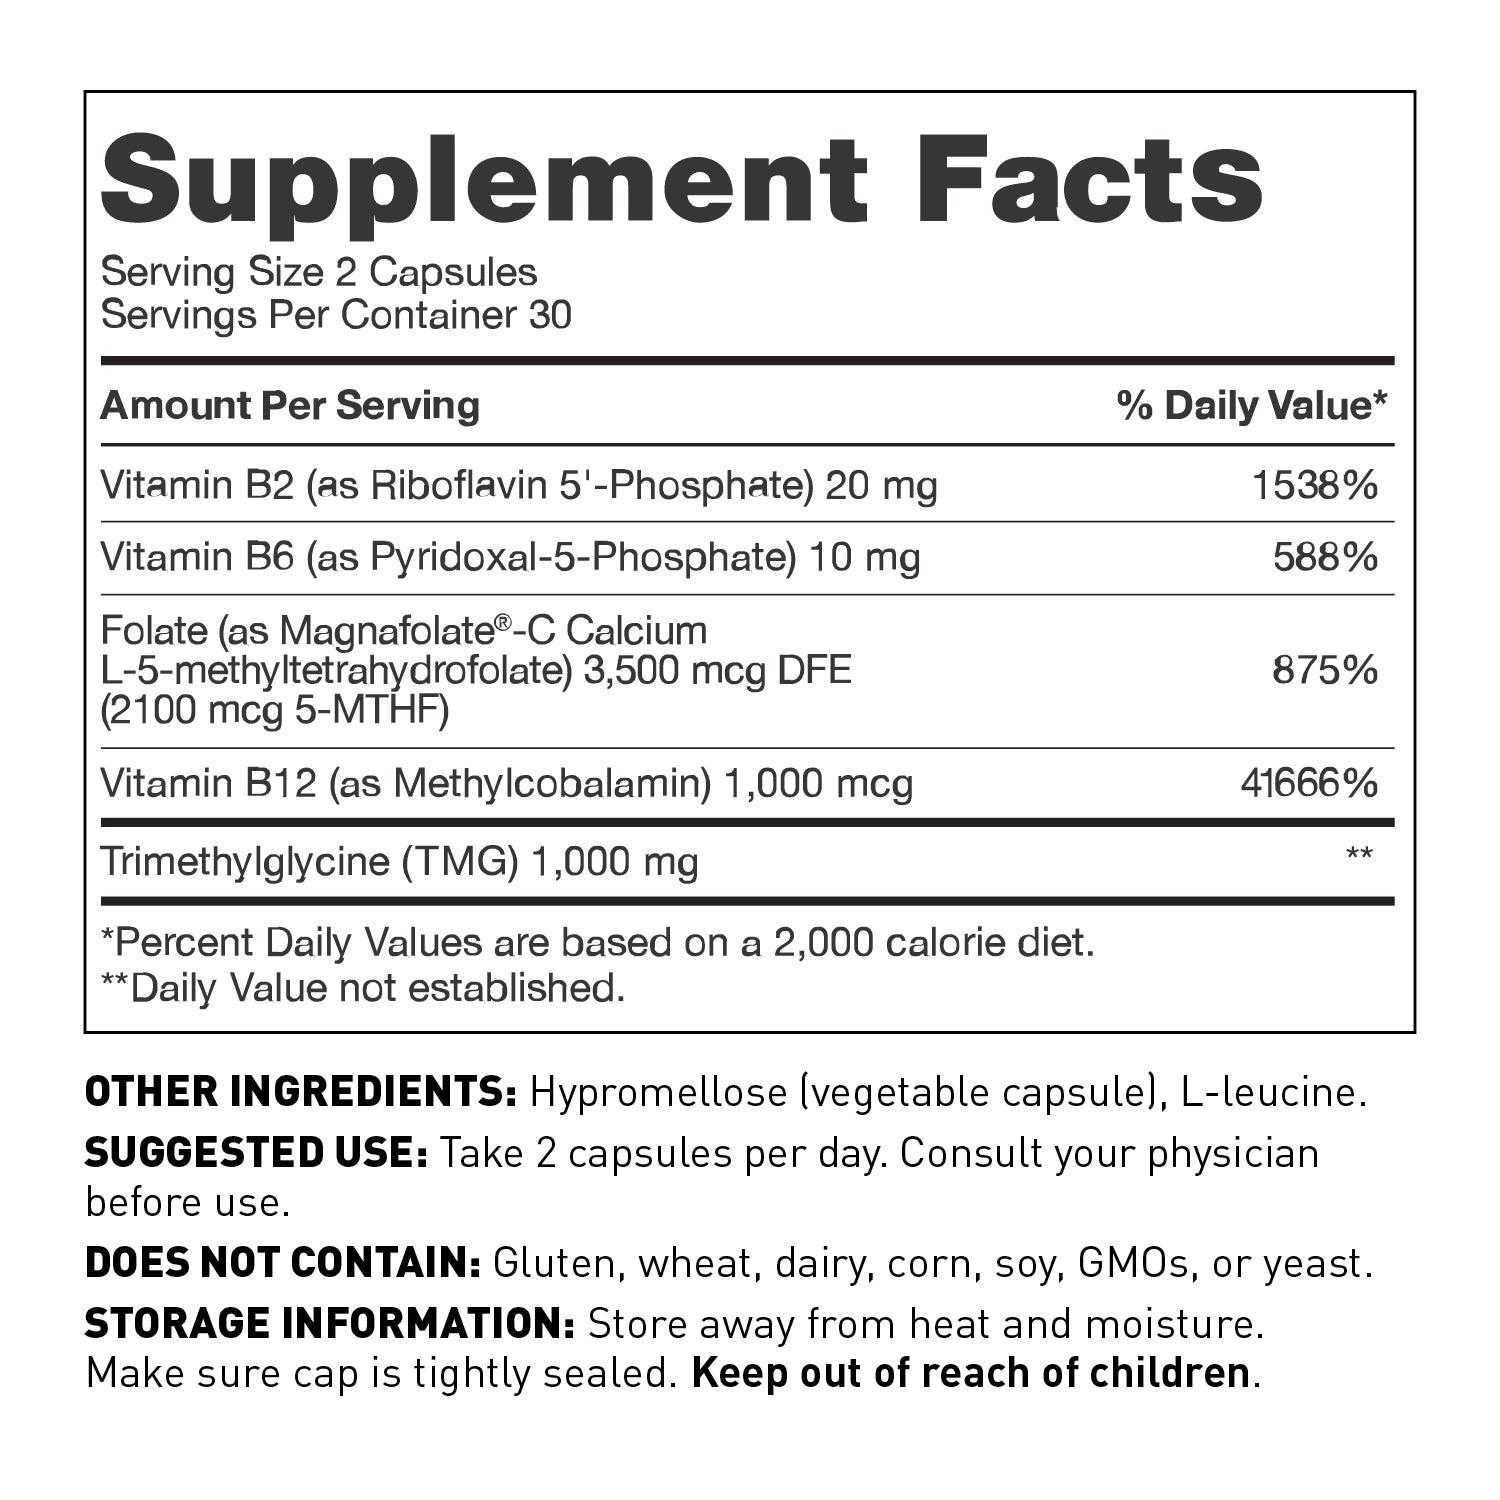 Methyl folate capsules to support MTHFR supplement facts - Amy Myers MD®